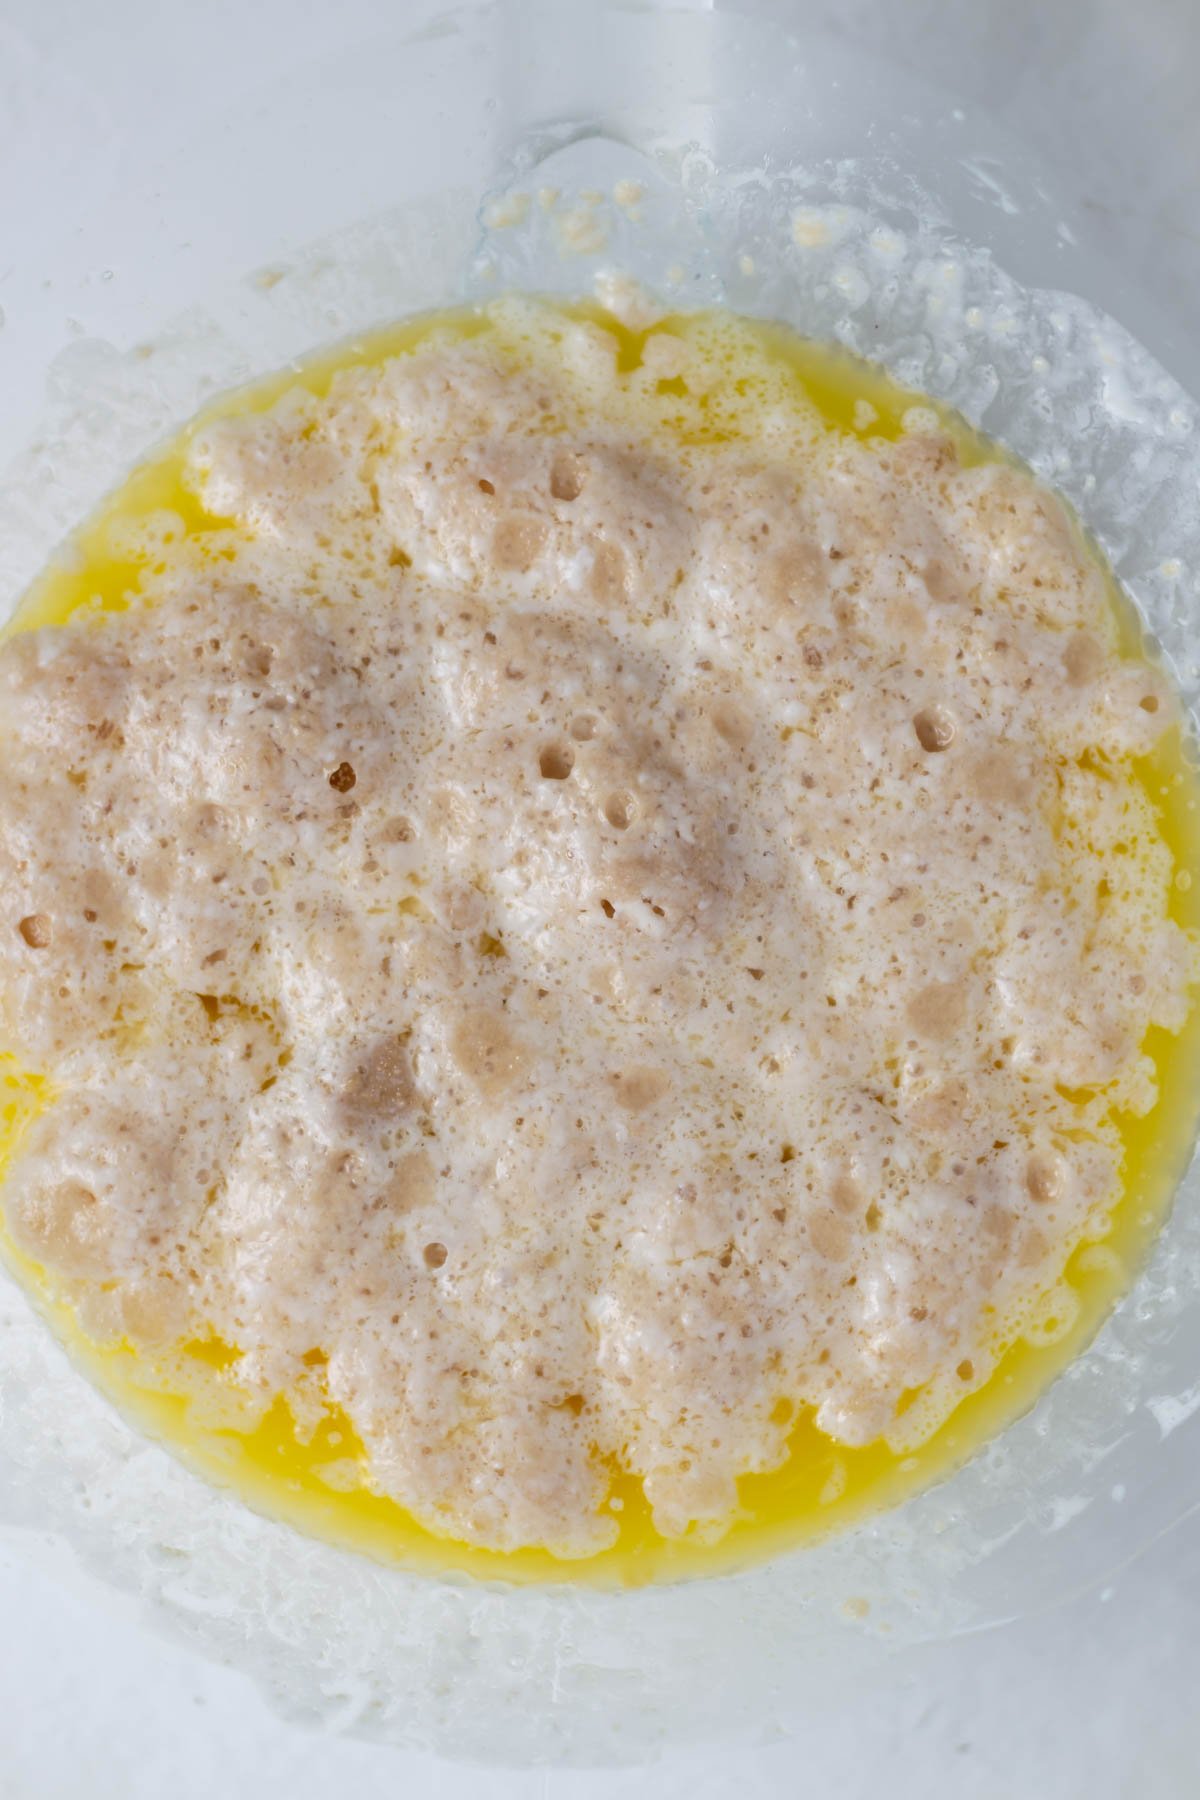 activated yeast with sugar, milk and melted butter in a mixing bowl